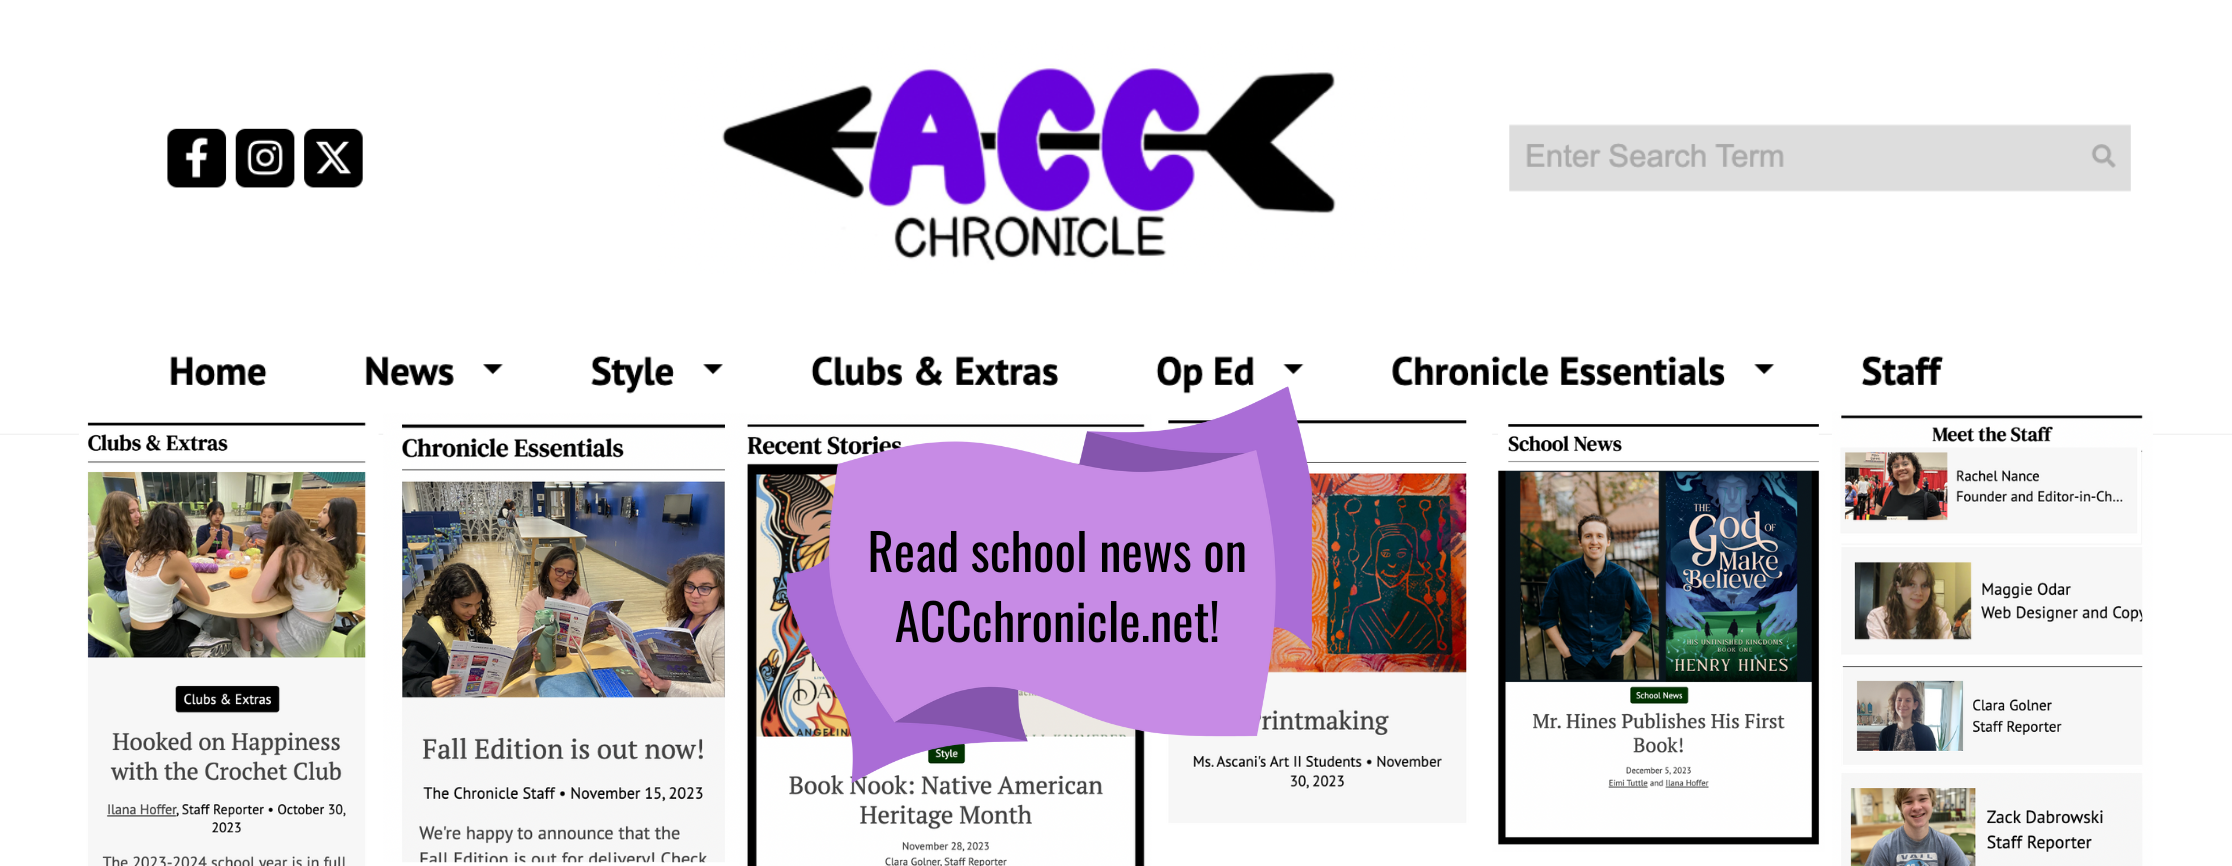 A screenshot of the most recent edition of the online school newspaper, ACC Chronicle, w/ images of students, books, and other important topics covered in the edition.